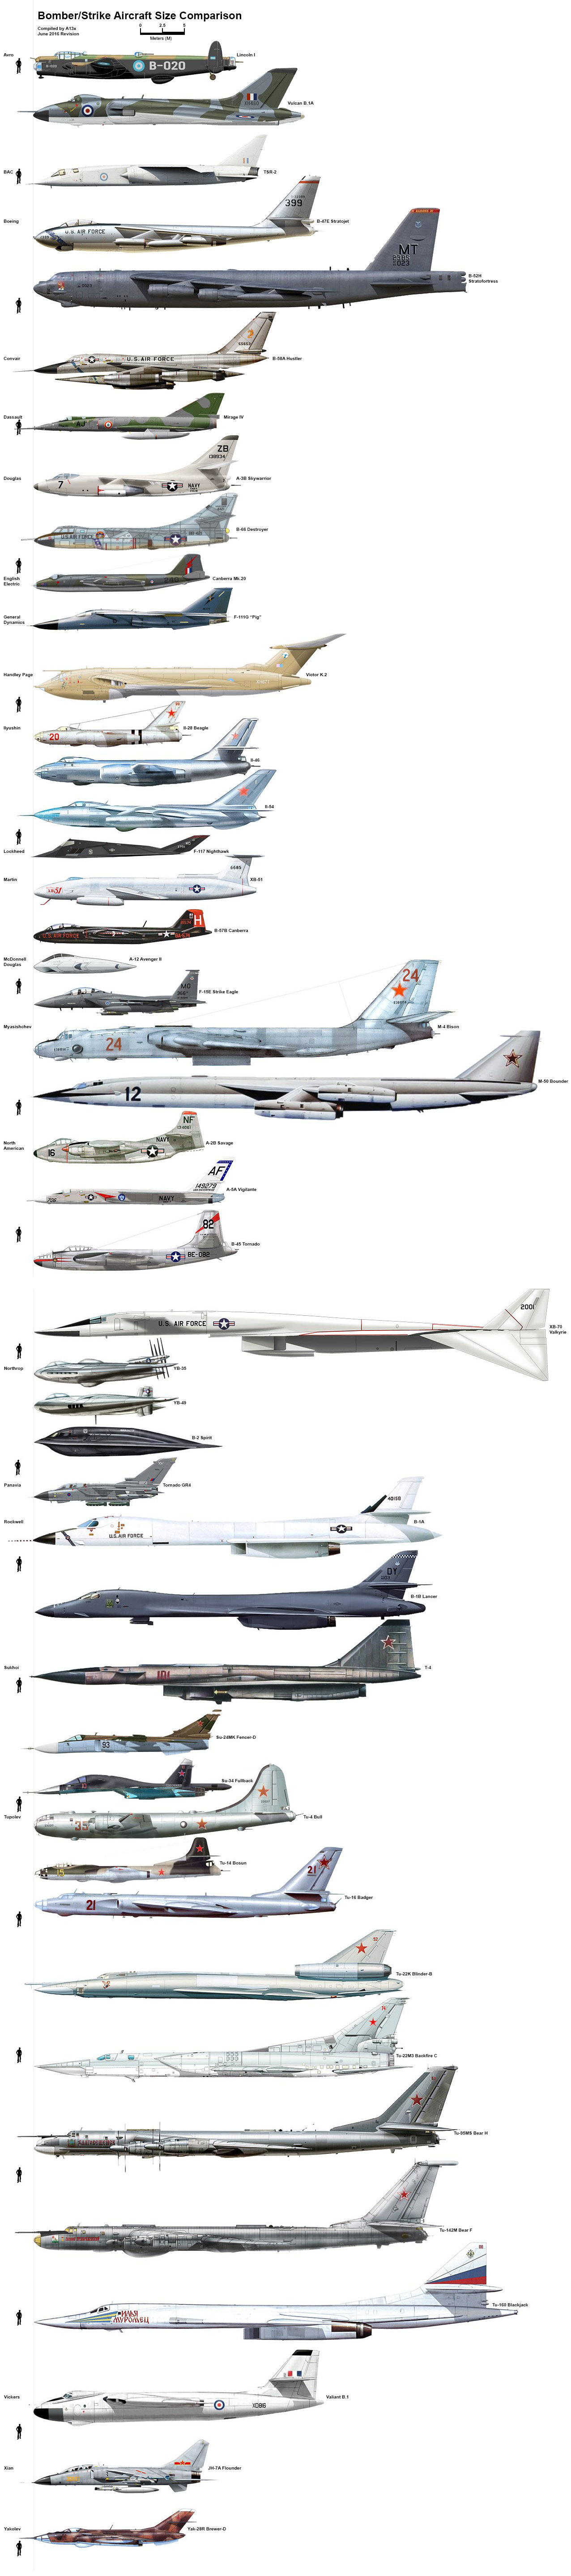 Helicopter Size Comparison Chart